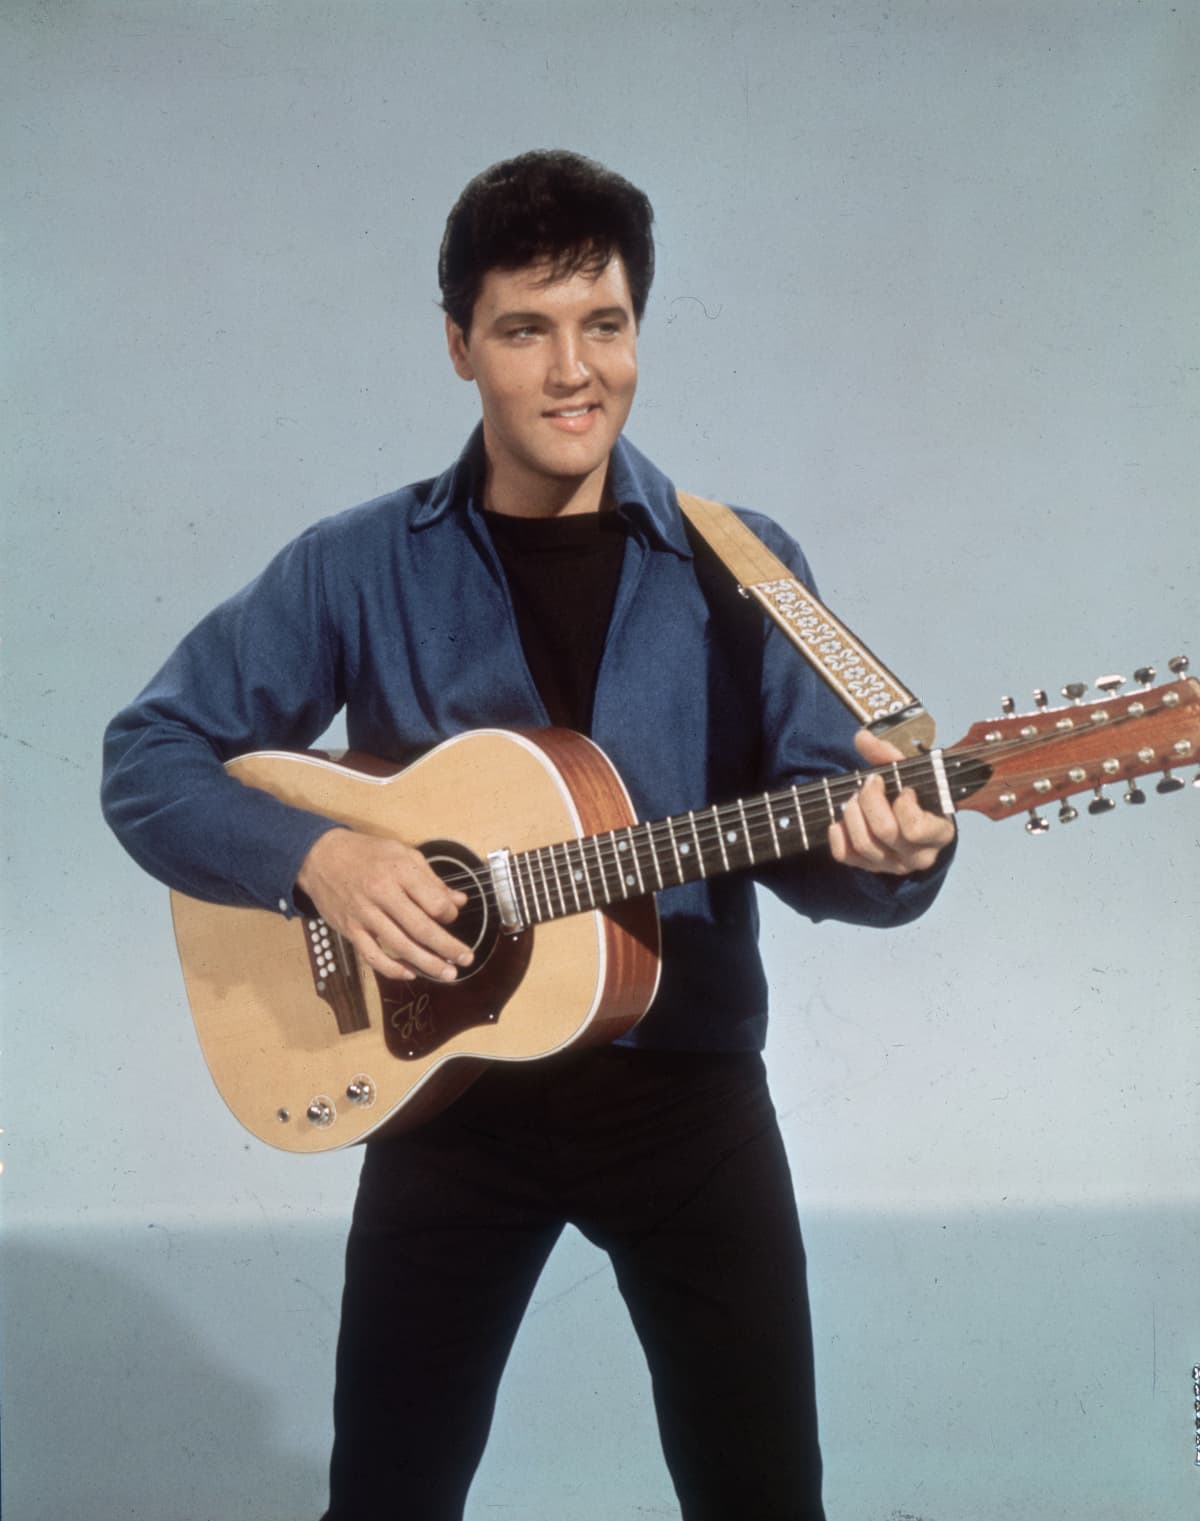 circa 1955:  American rock 'n roll singer Elvis Presley (1935 - 1977) with a twelve string guitar.  (Photo by Hulton Archive/Getty Images)